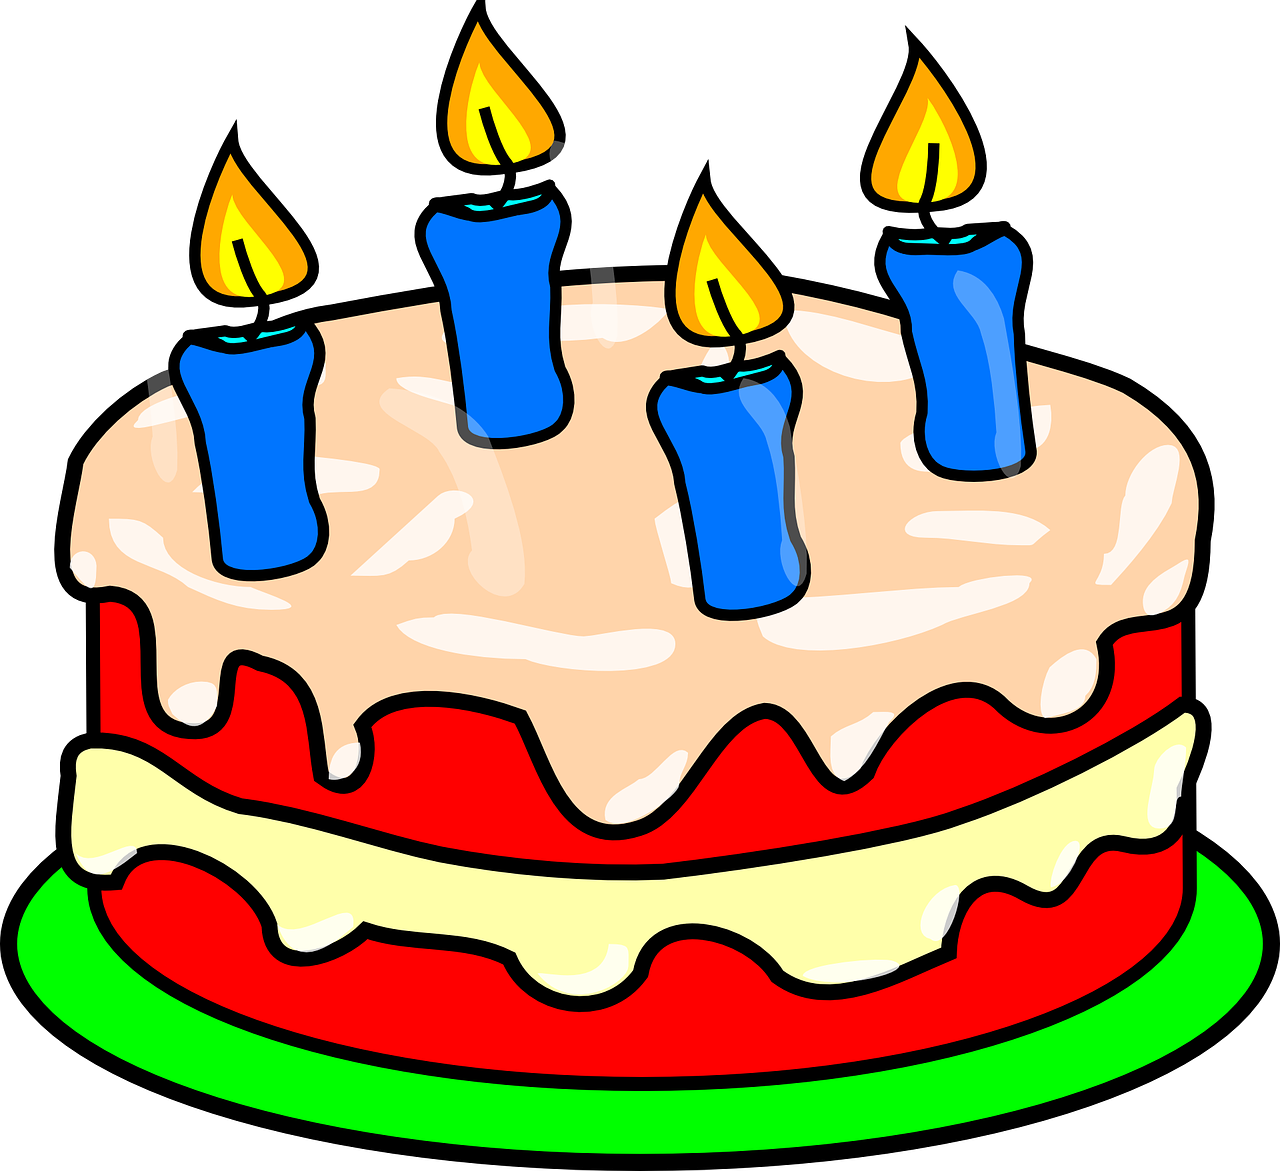 A year of reading. December clipart birthday cake